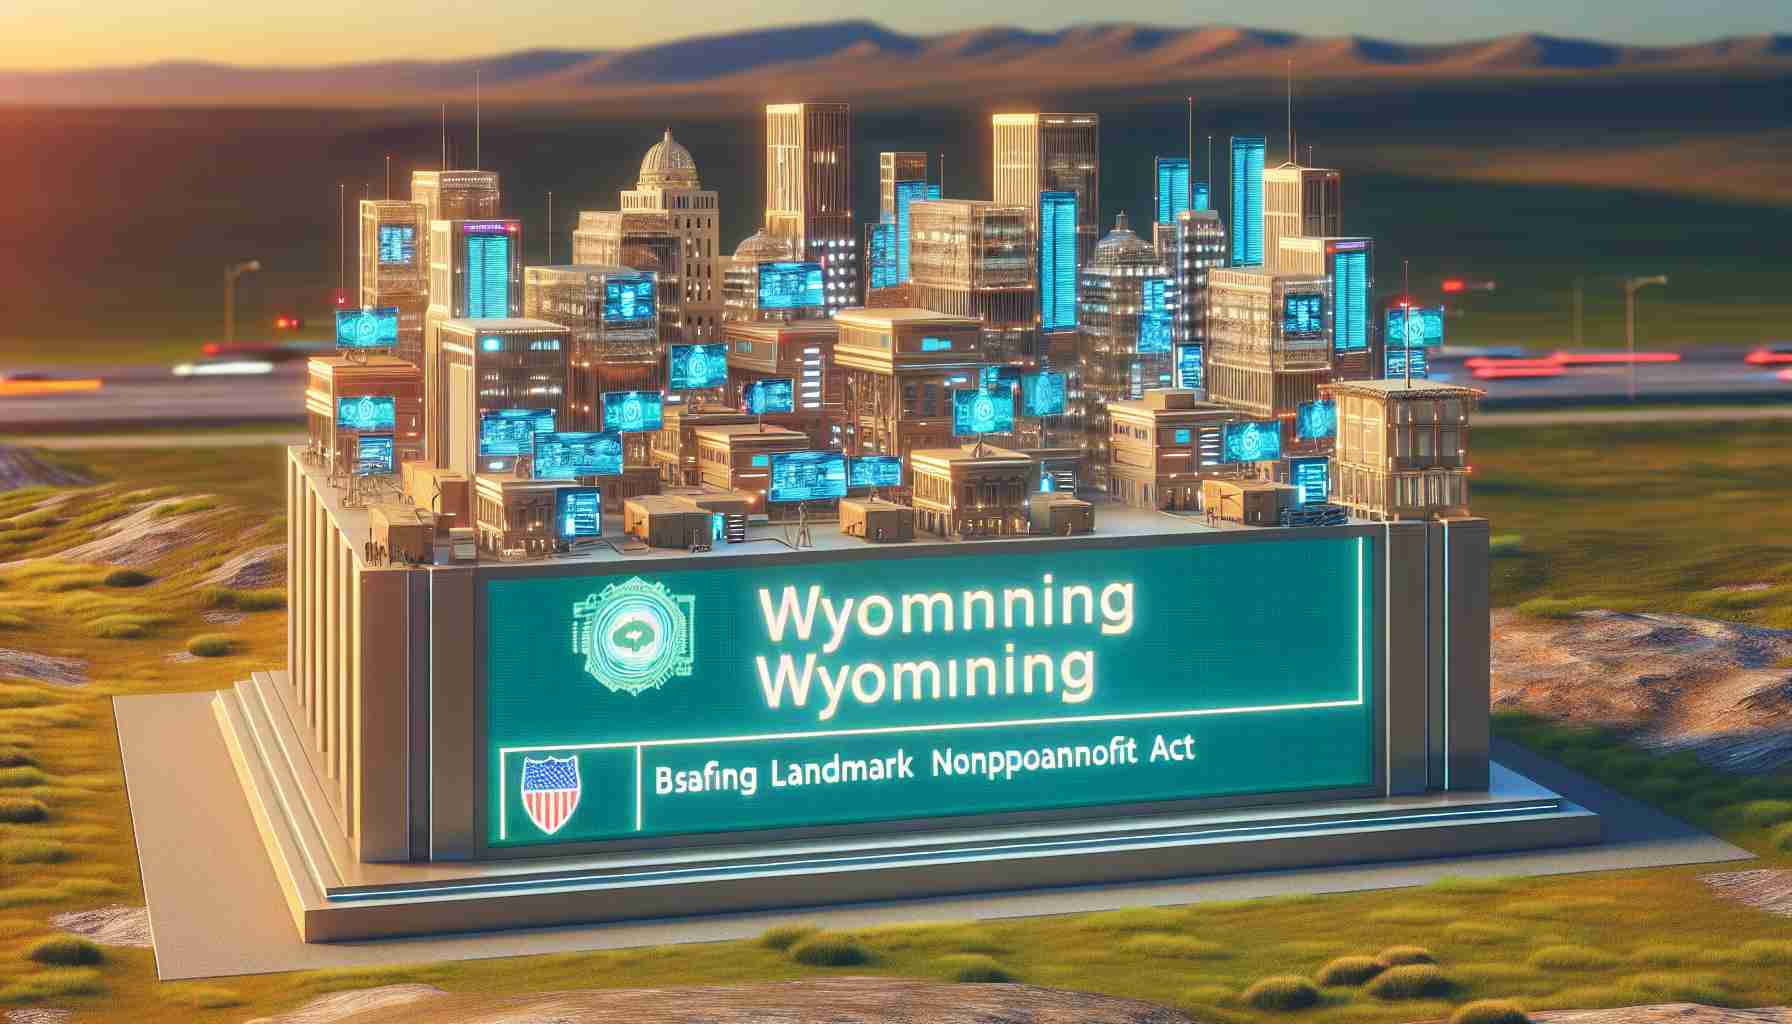 A realistic high definition image showing the landmarks of Wyoming, the emerging US Blockchain hub. This includes numerous technological infrastructures exhibiting blockchain technology collectively forming an innovative landscape. On the foreground is a signage displaying the words 'Landmark Nonprofit Act', signifying their recent legislative movement.